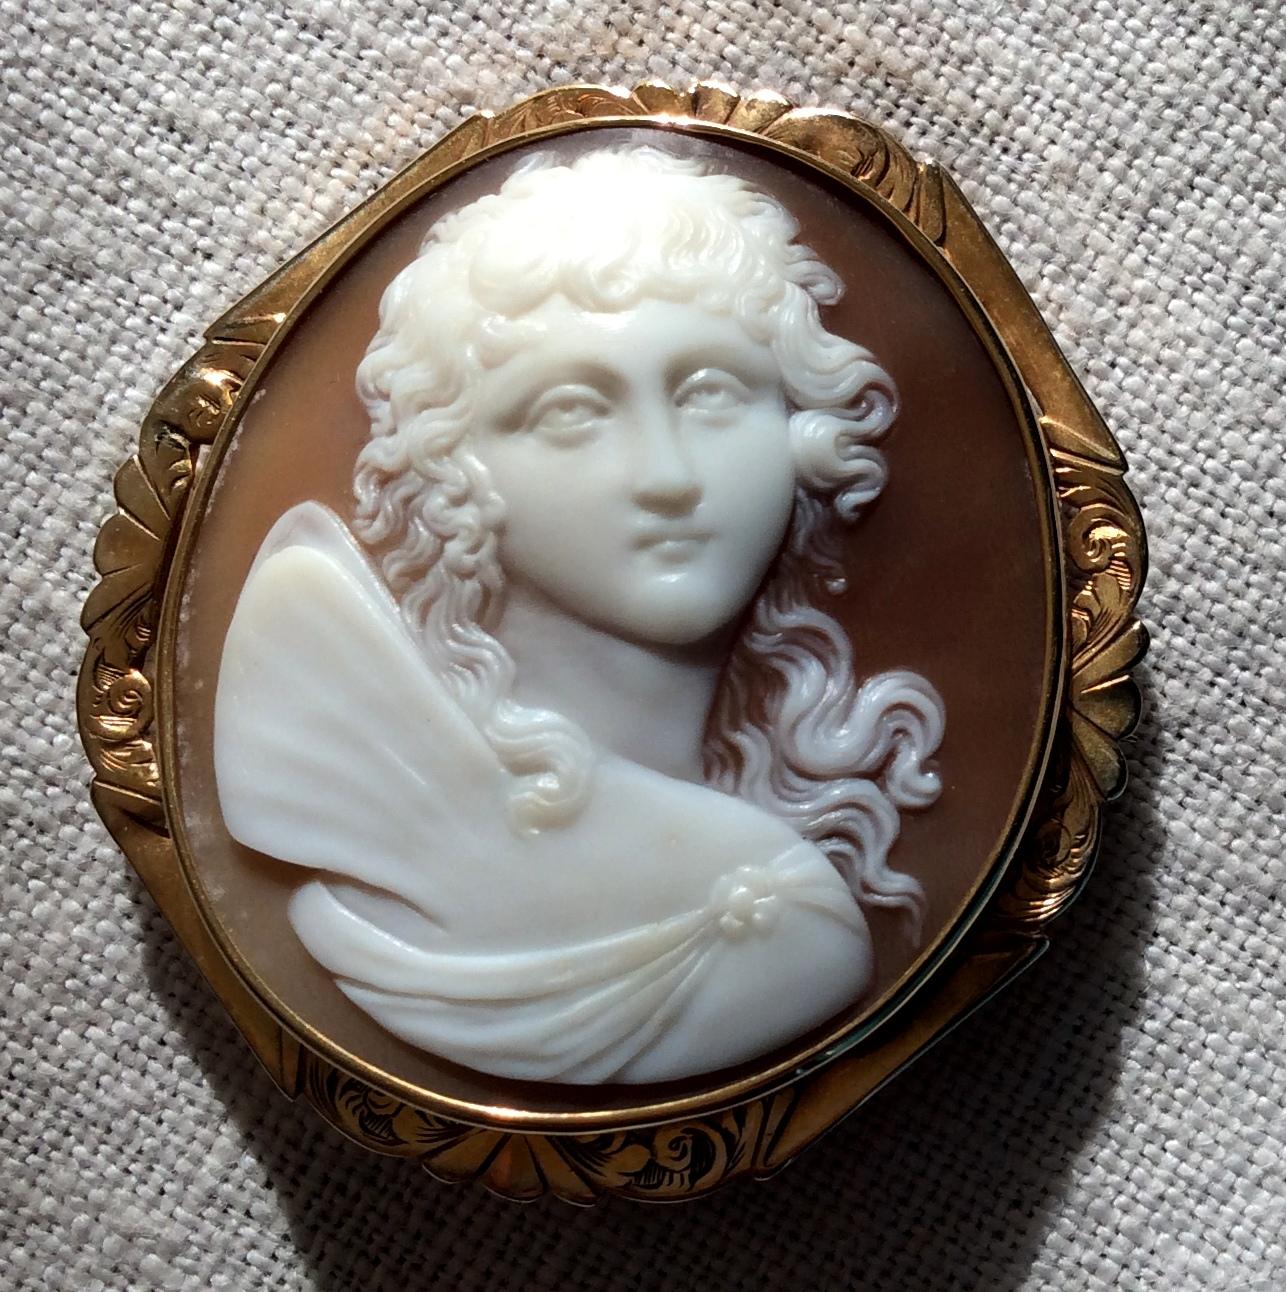 Excellent Quality high-relief shell cameo brooch in a gold mount, circa 1860. The subject is Psyche, the wife of Eros and Goddess of Soul. This is a rare cameo because it depicts Psyche carved in front face.  The carving is amazing, you can see all